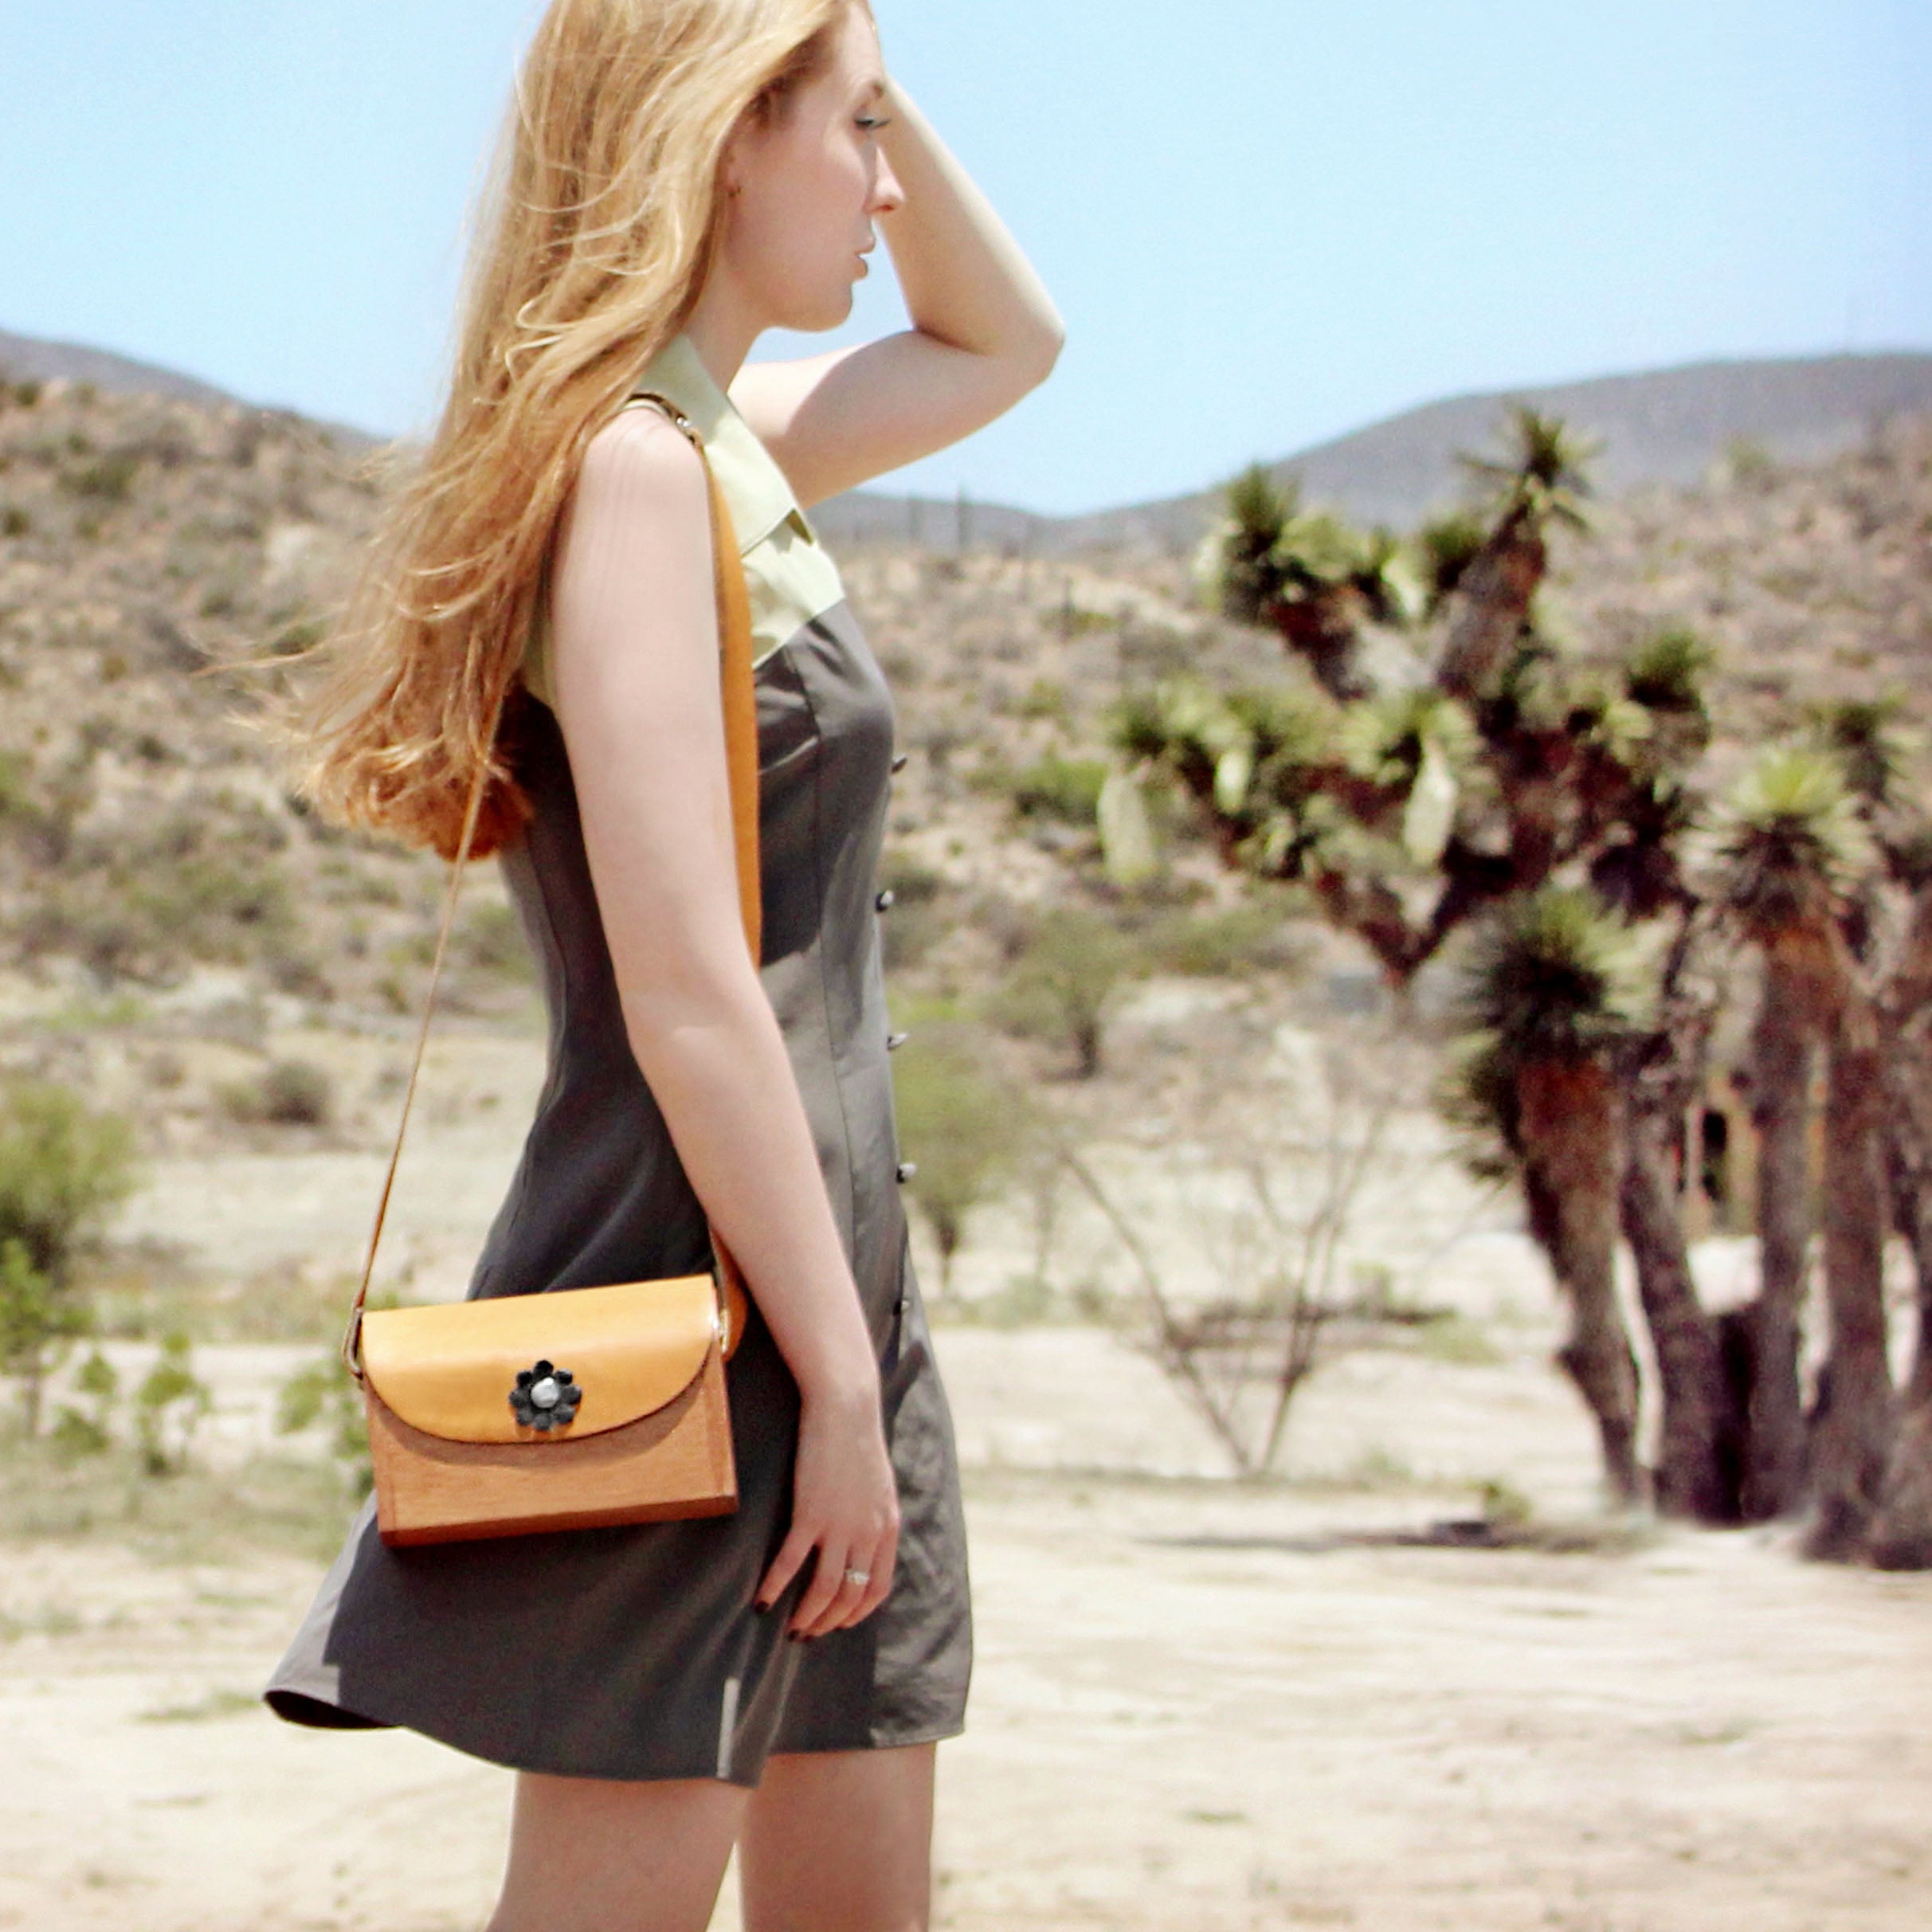 Small crossbody bags or wooden purse, Handmade wooden bag or mexico handbag, Leather and wood bag or wood leather purse